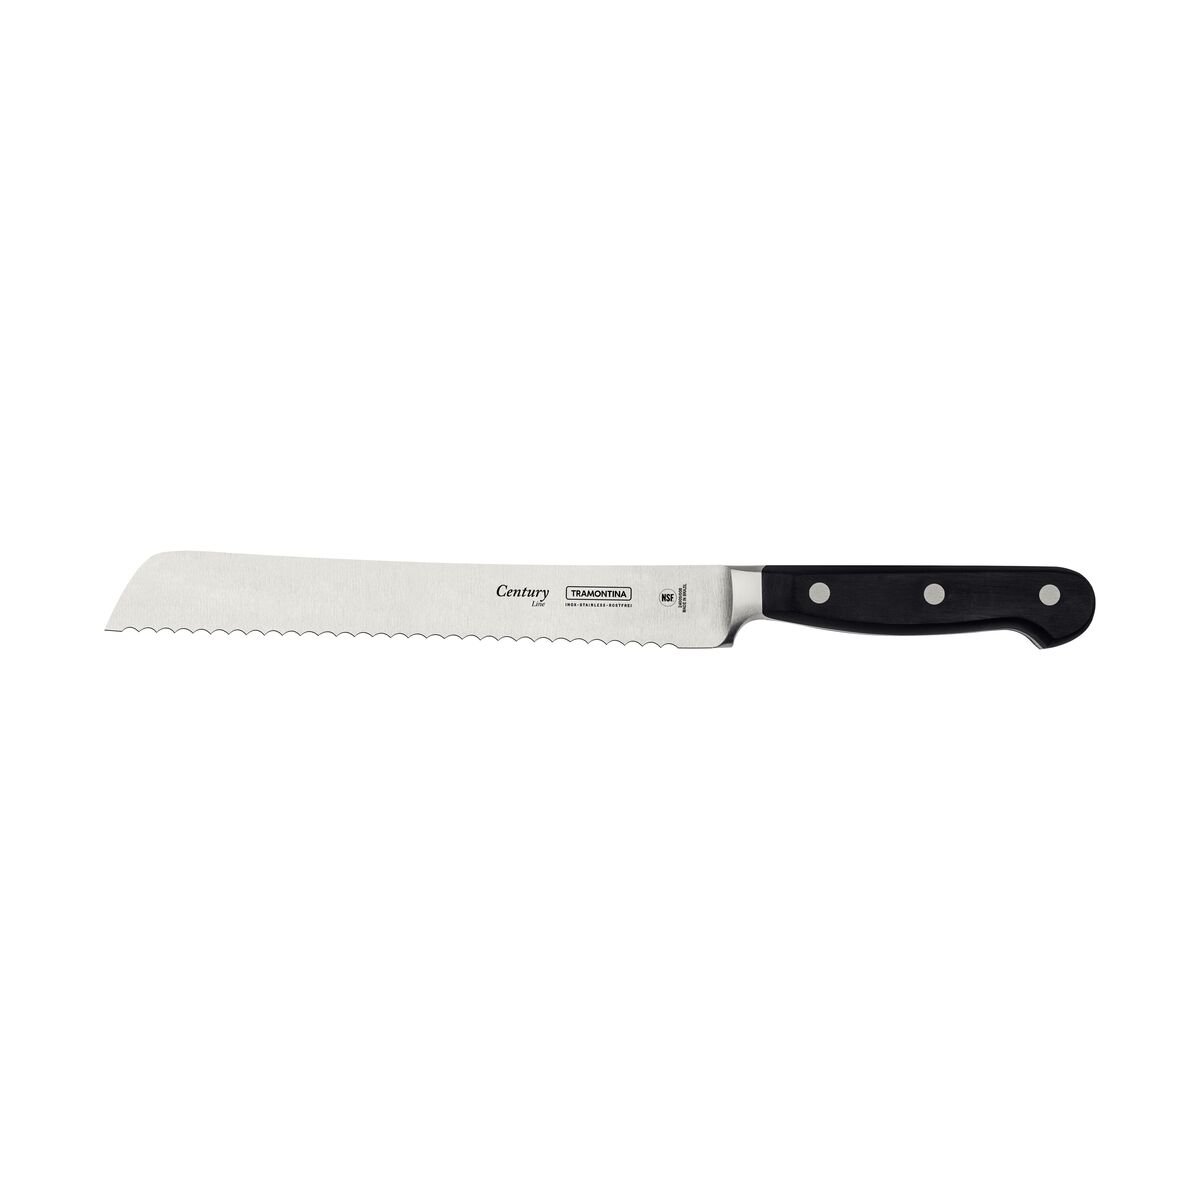 Tramontina Century 8" Bread knife with Stainless-Steel Blade and Black Polycarbonate Handle